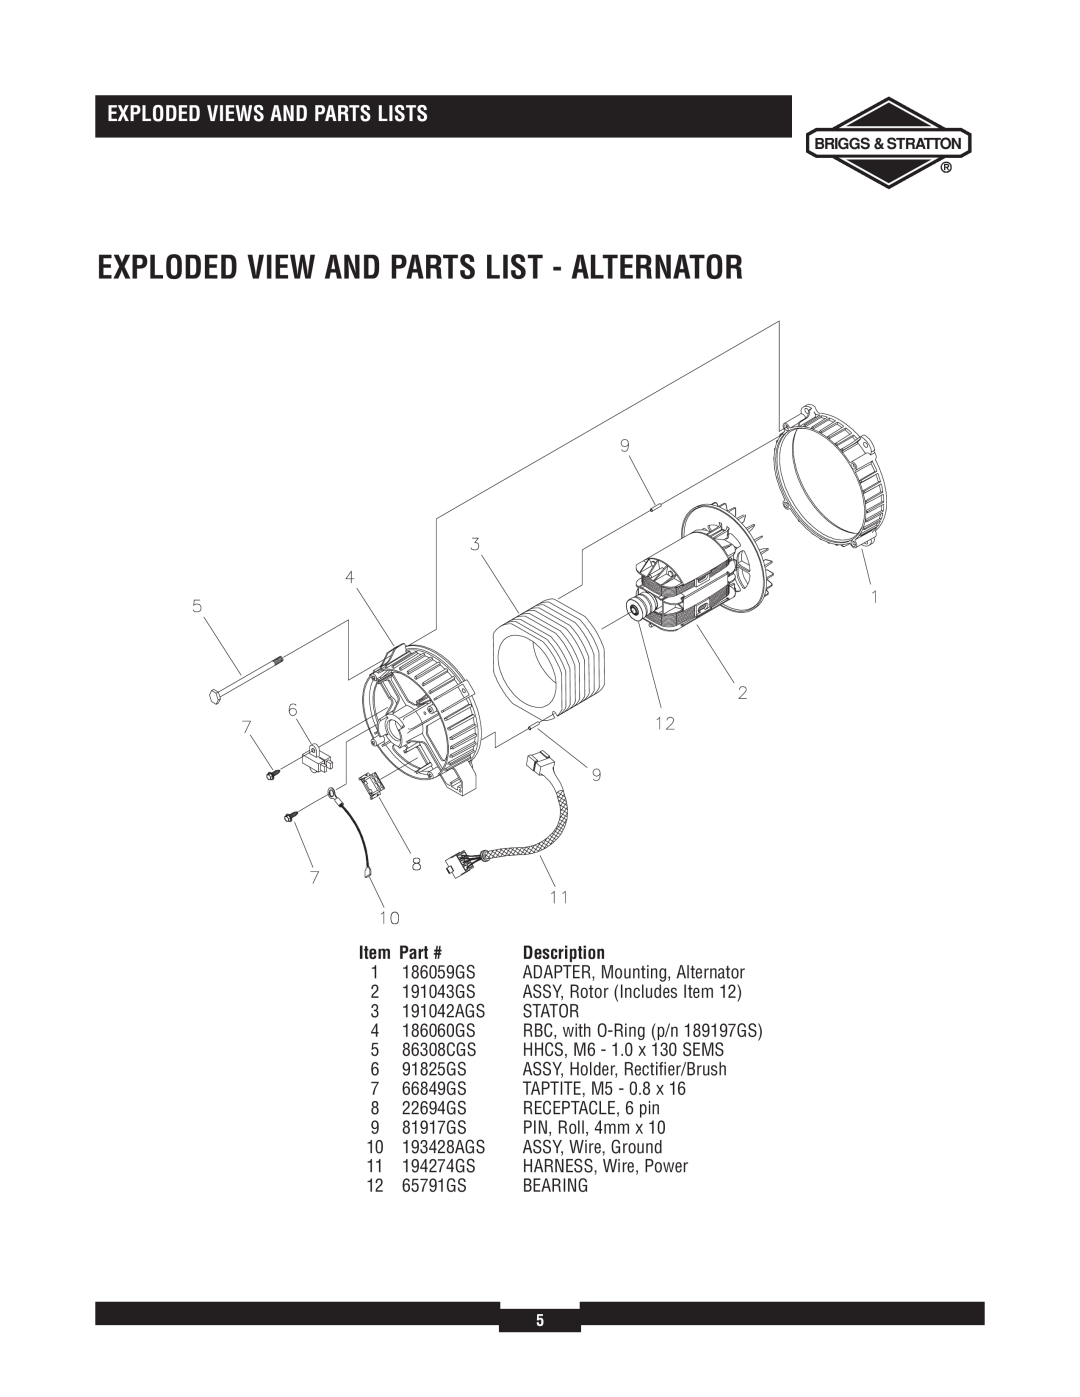 Briggs & Stratton 30324 Exploded View And Parts List - Alternator, Exploded Views And Parts Lists, Description, 1 186059GS 